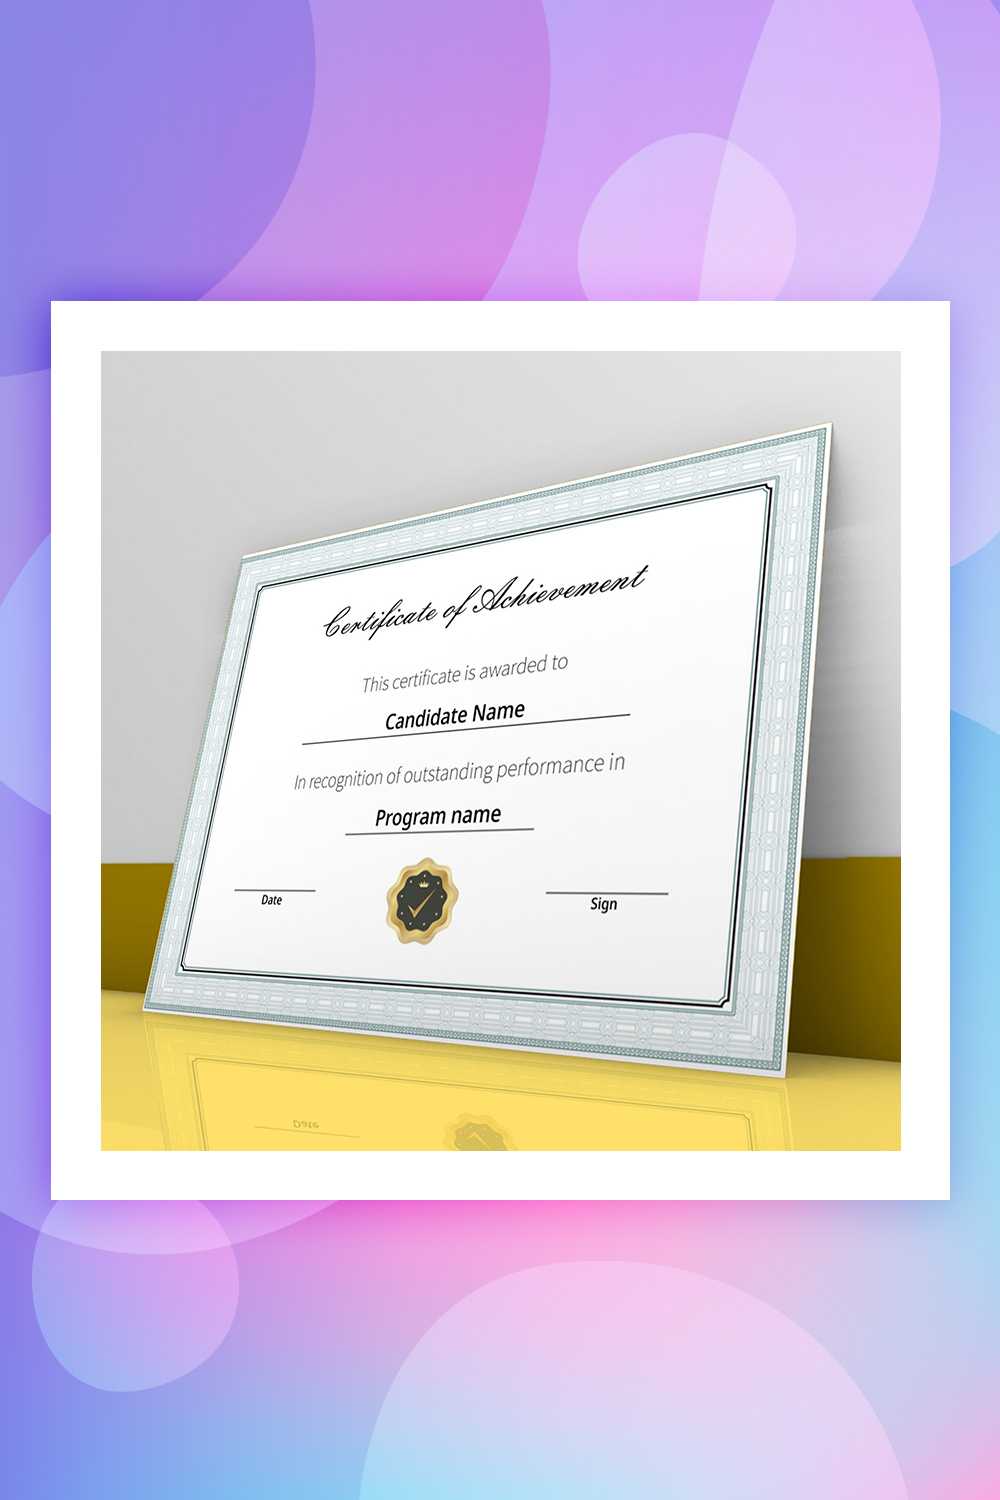 28 Attention Grabbing Certificate Templates - Colorlib For No Certificate Templates Could Be Found